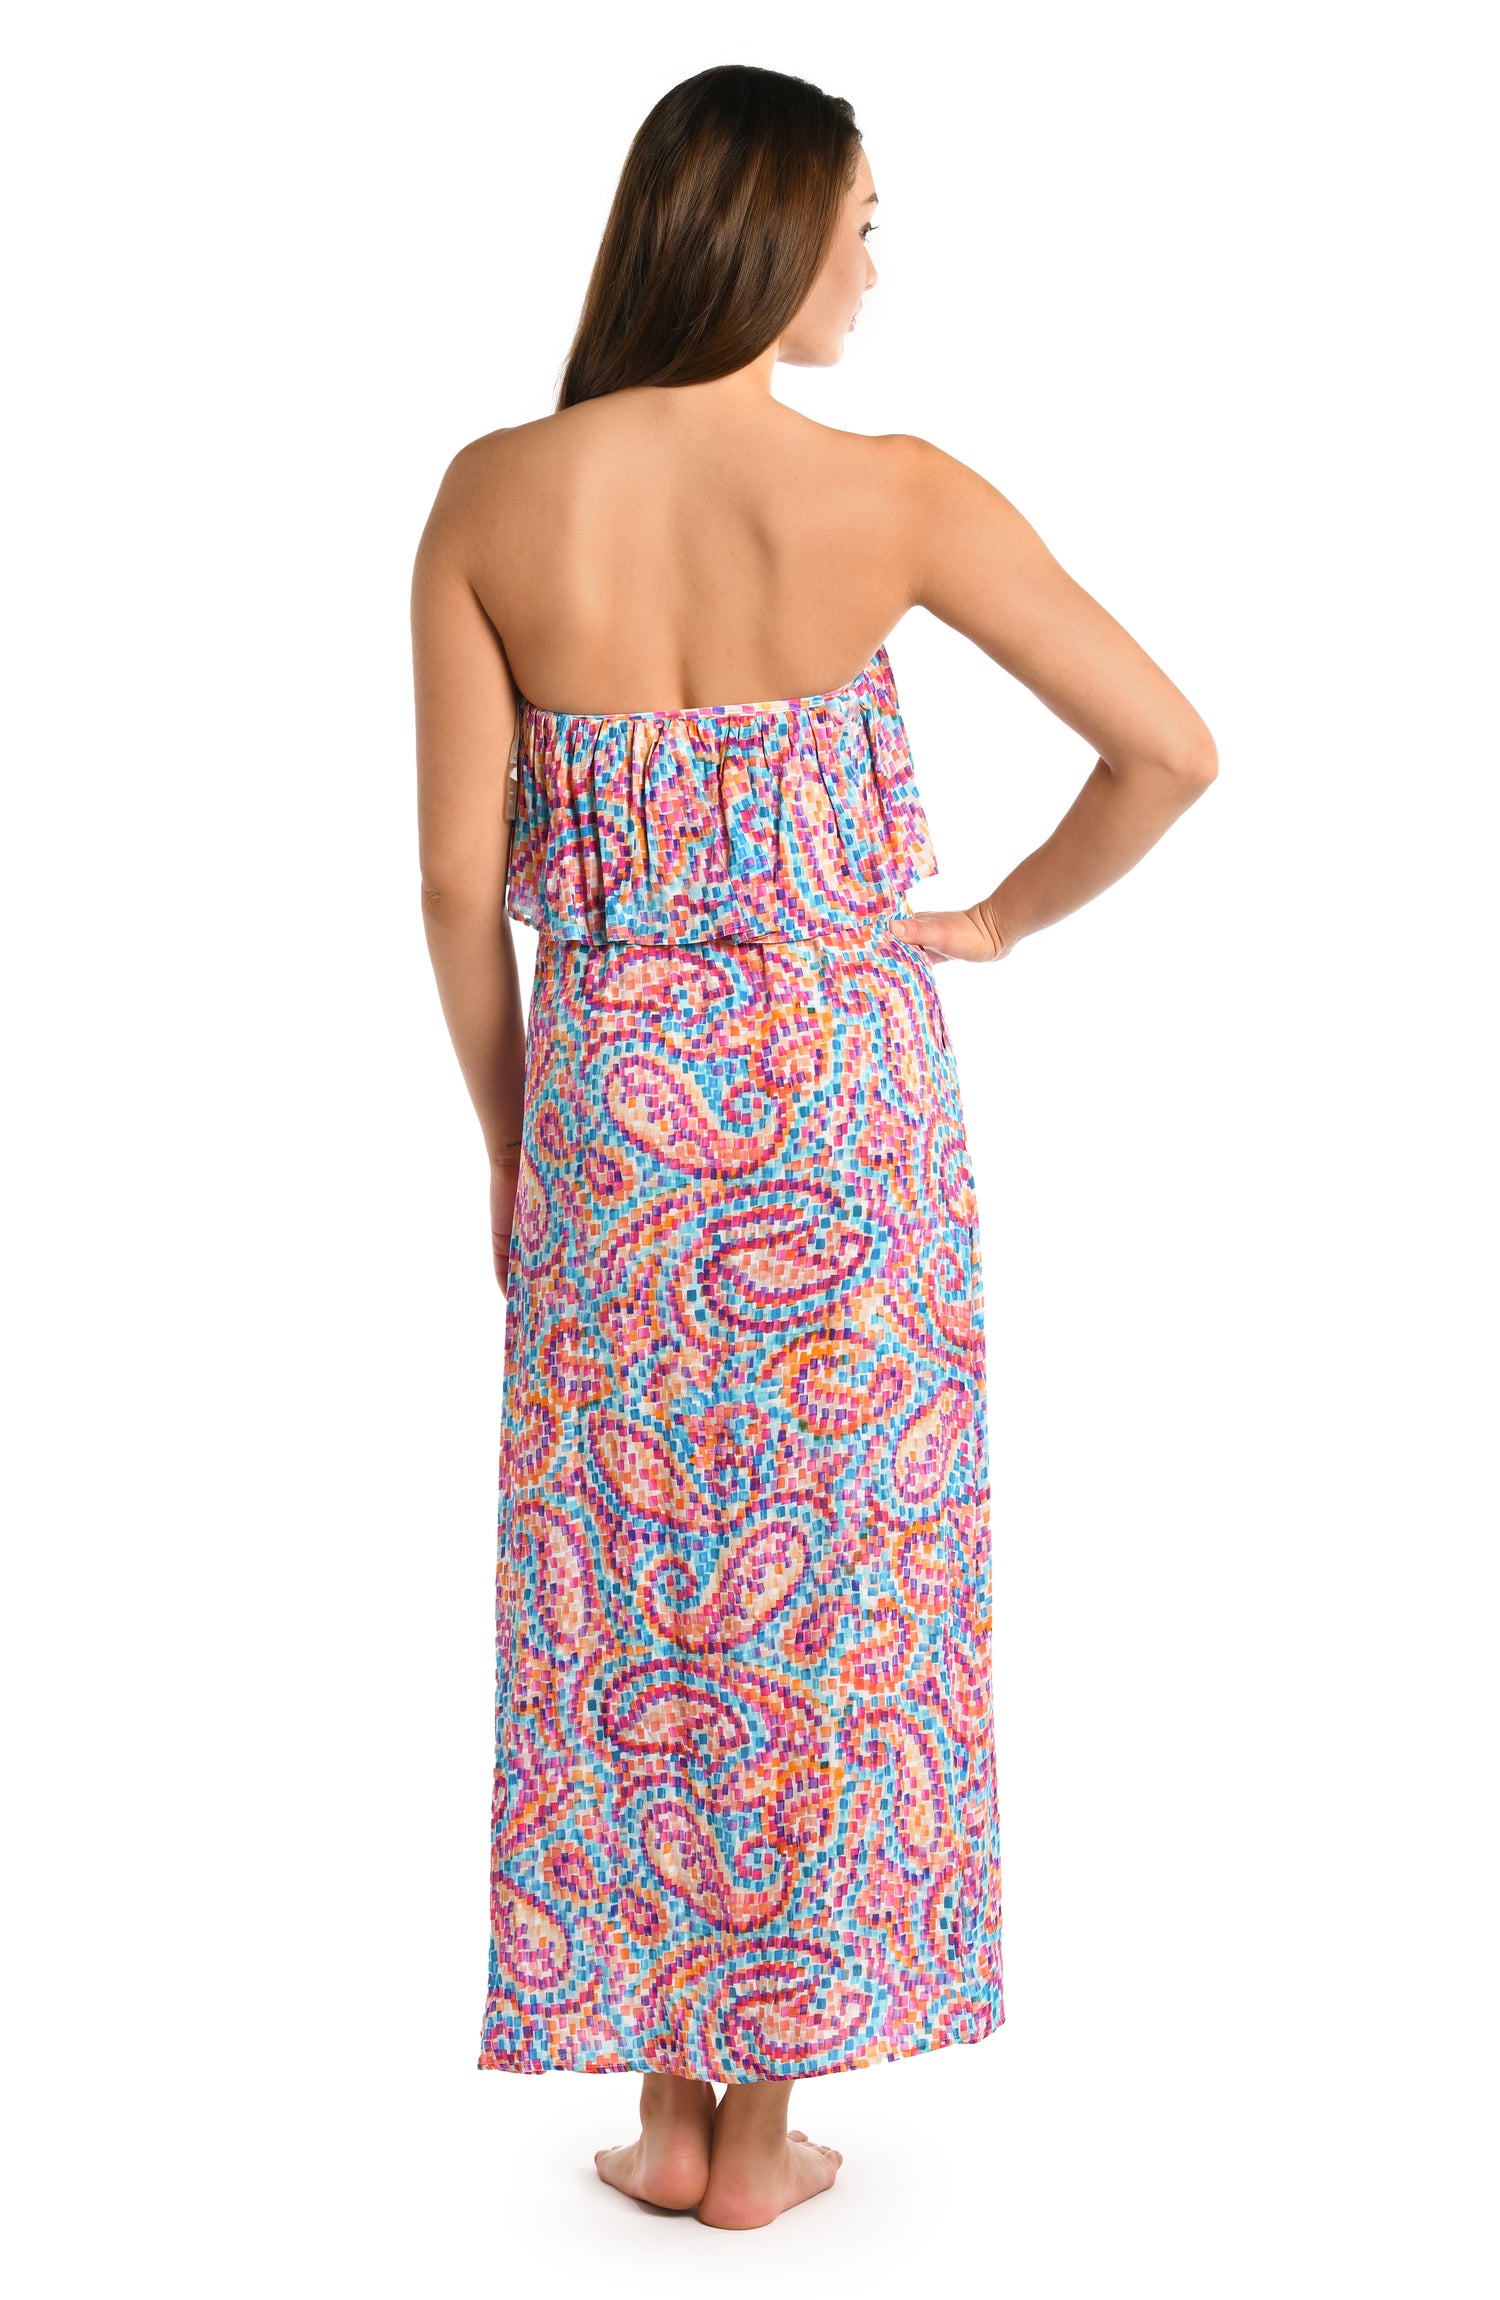 Model is wearing a pink multicolored paisley printed strapless midi dress cover up from our Pebble Beach collection.